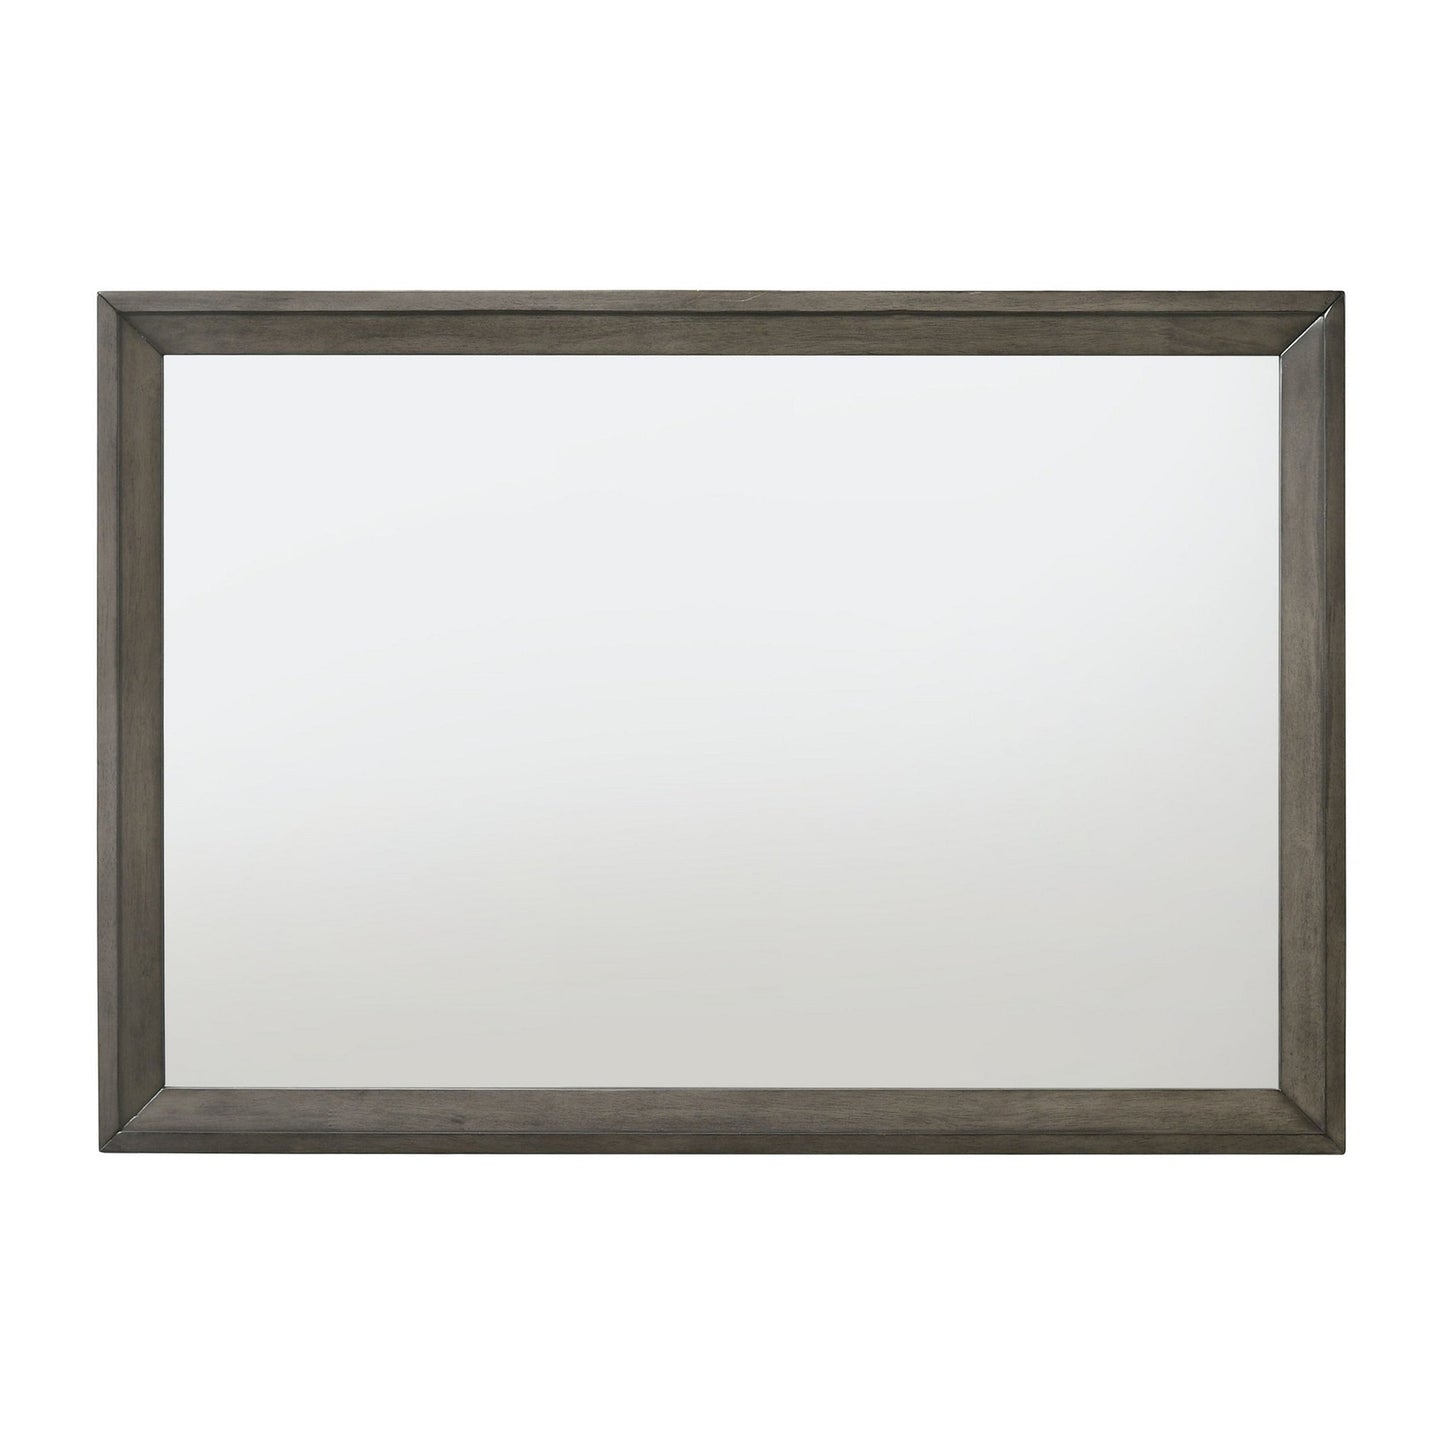 Benzara Gray and Silver Rectangular Wooden Frame Mirror With Mounting Hardware